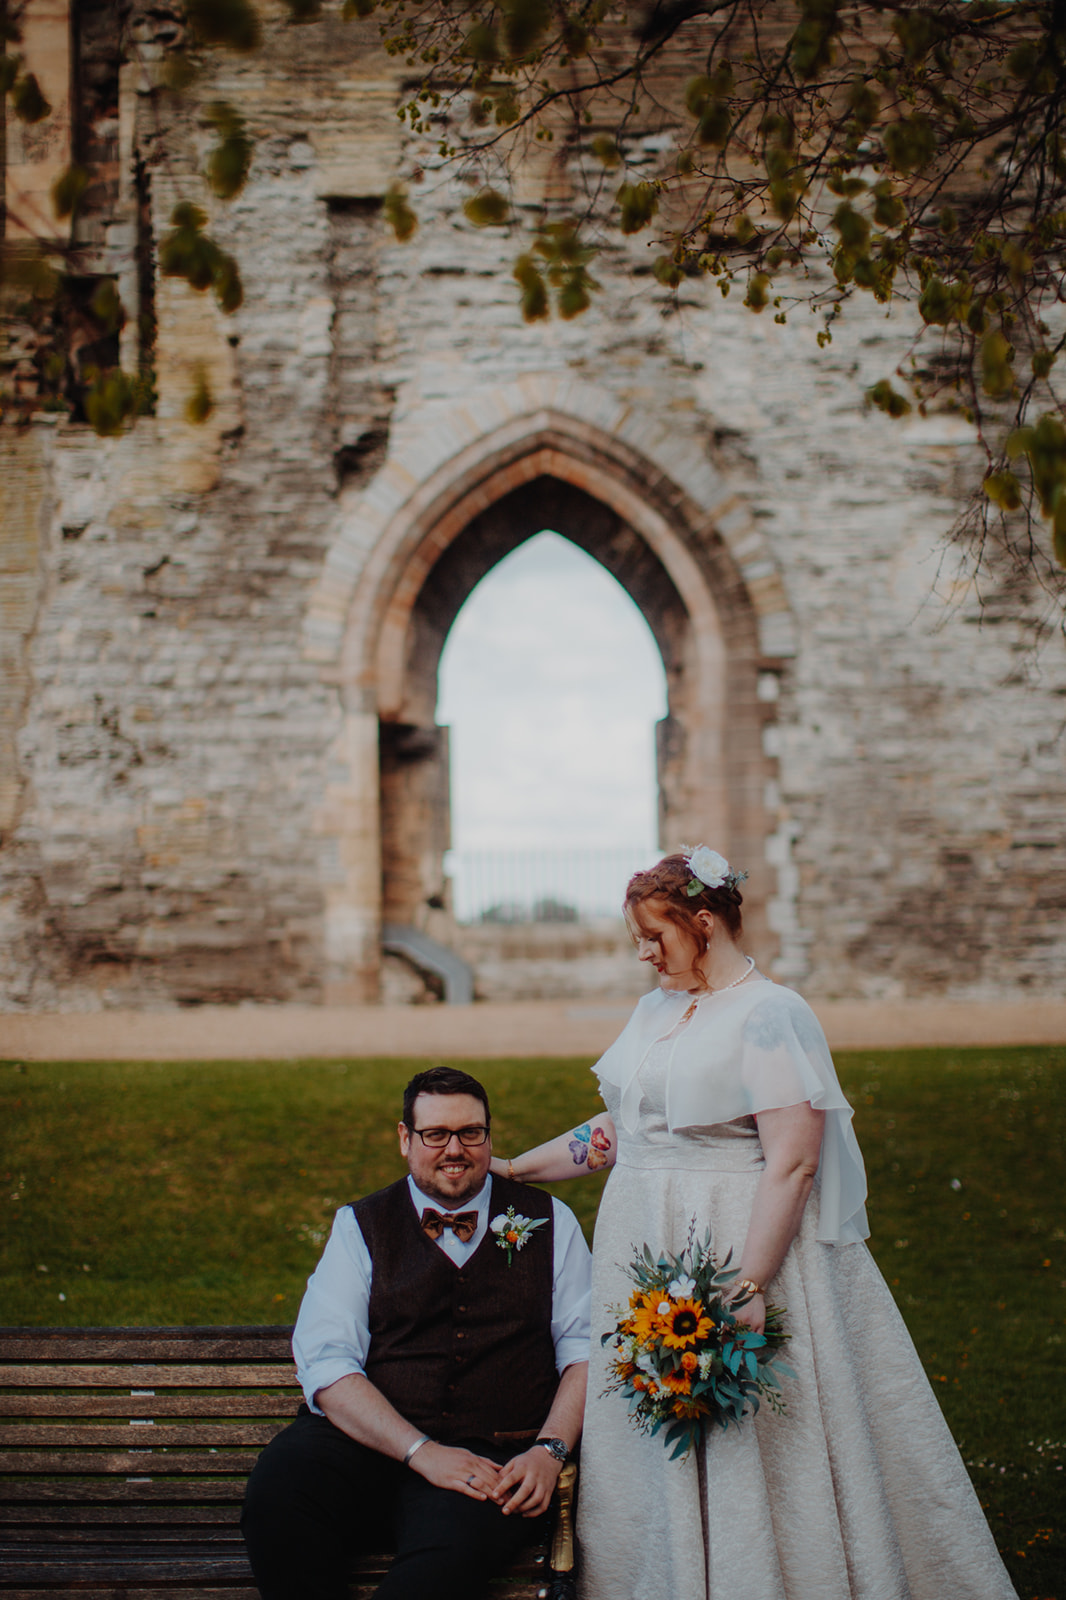 A man in a tweed waistcoat sits on a bench in front of a stone archway, his bride in a silk wedding dress stands at his side, looking down at him